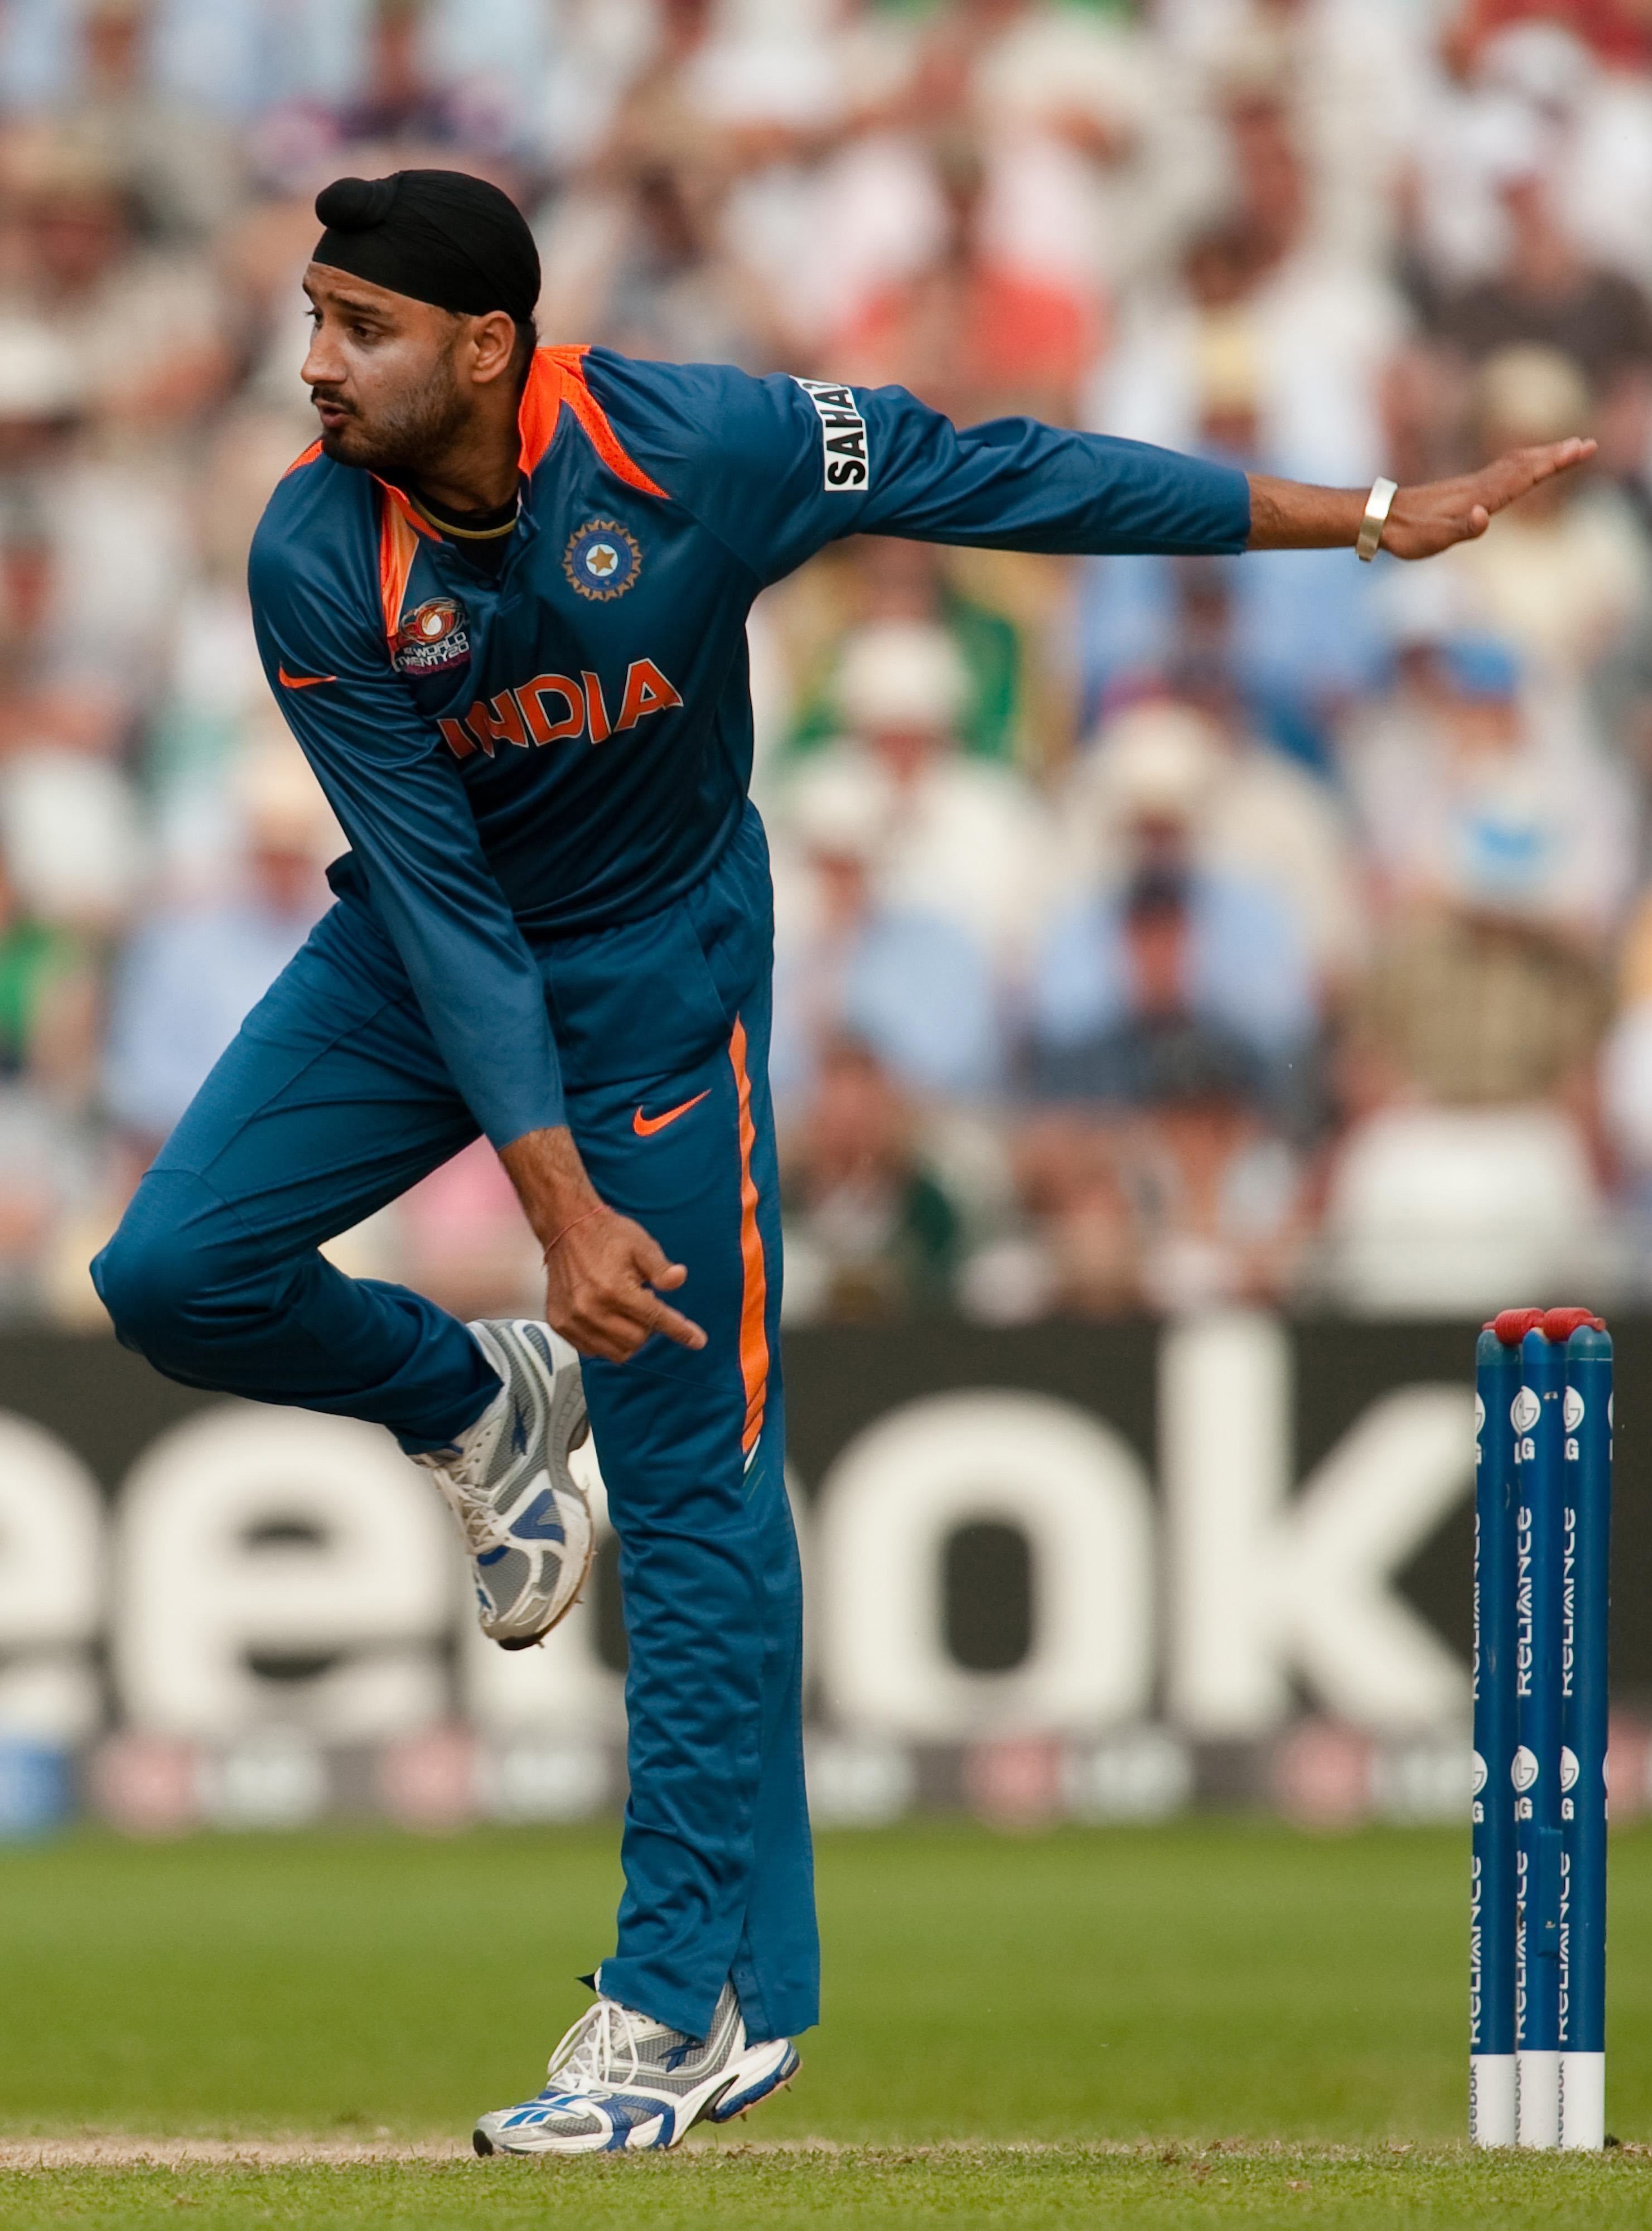 India off-spinner Harbhajan Singh ripped through England’s middle order (Gareth Copley/PA)